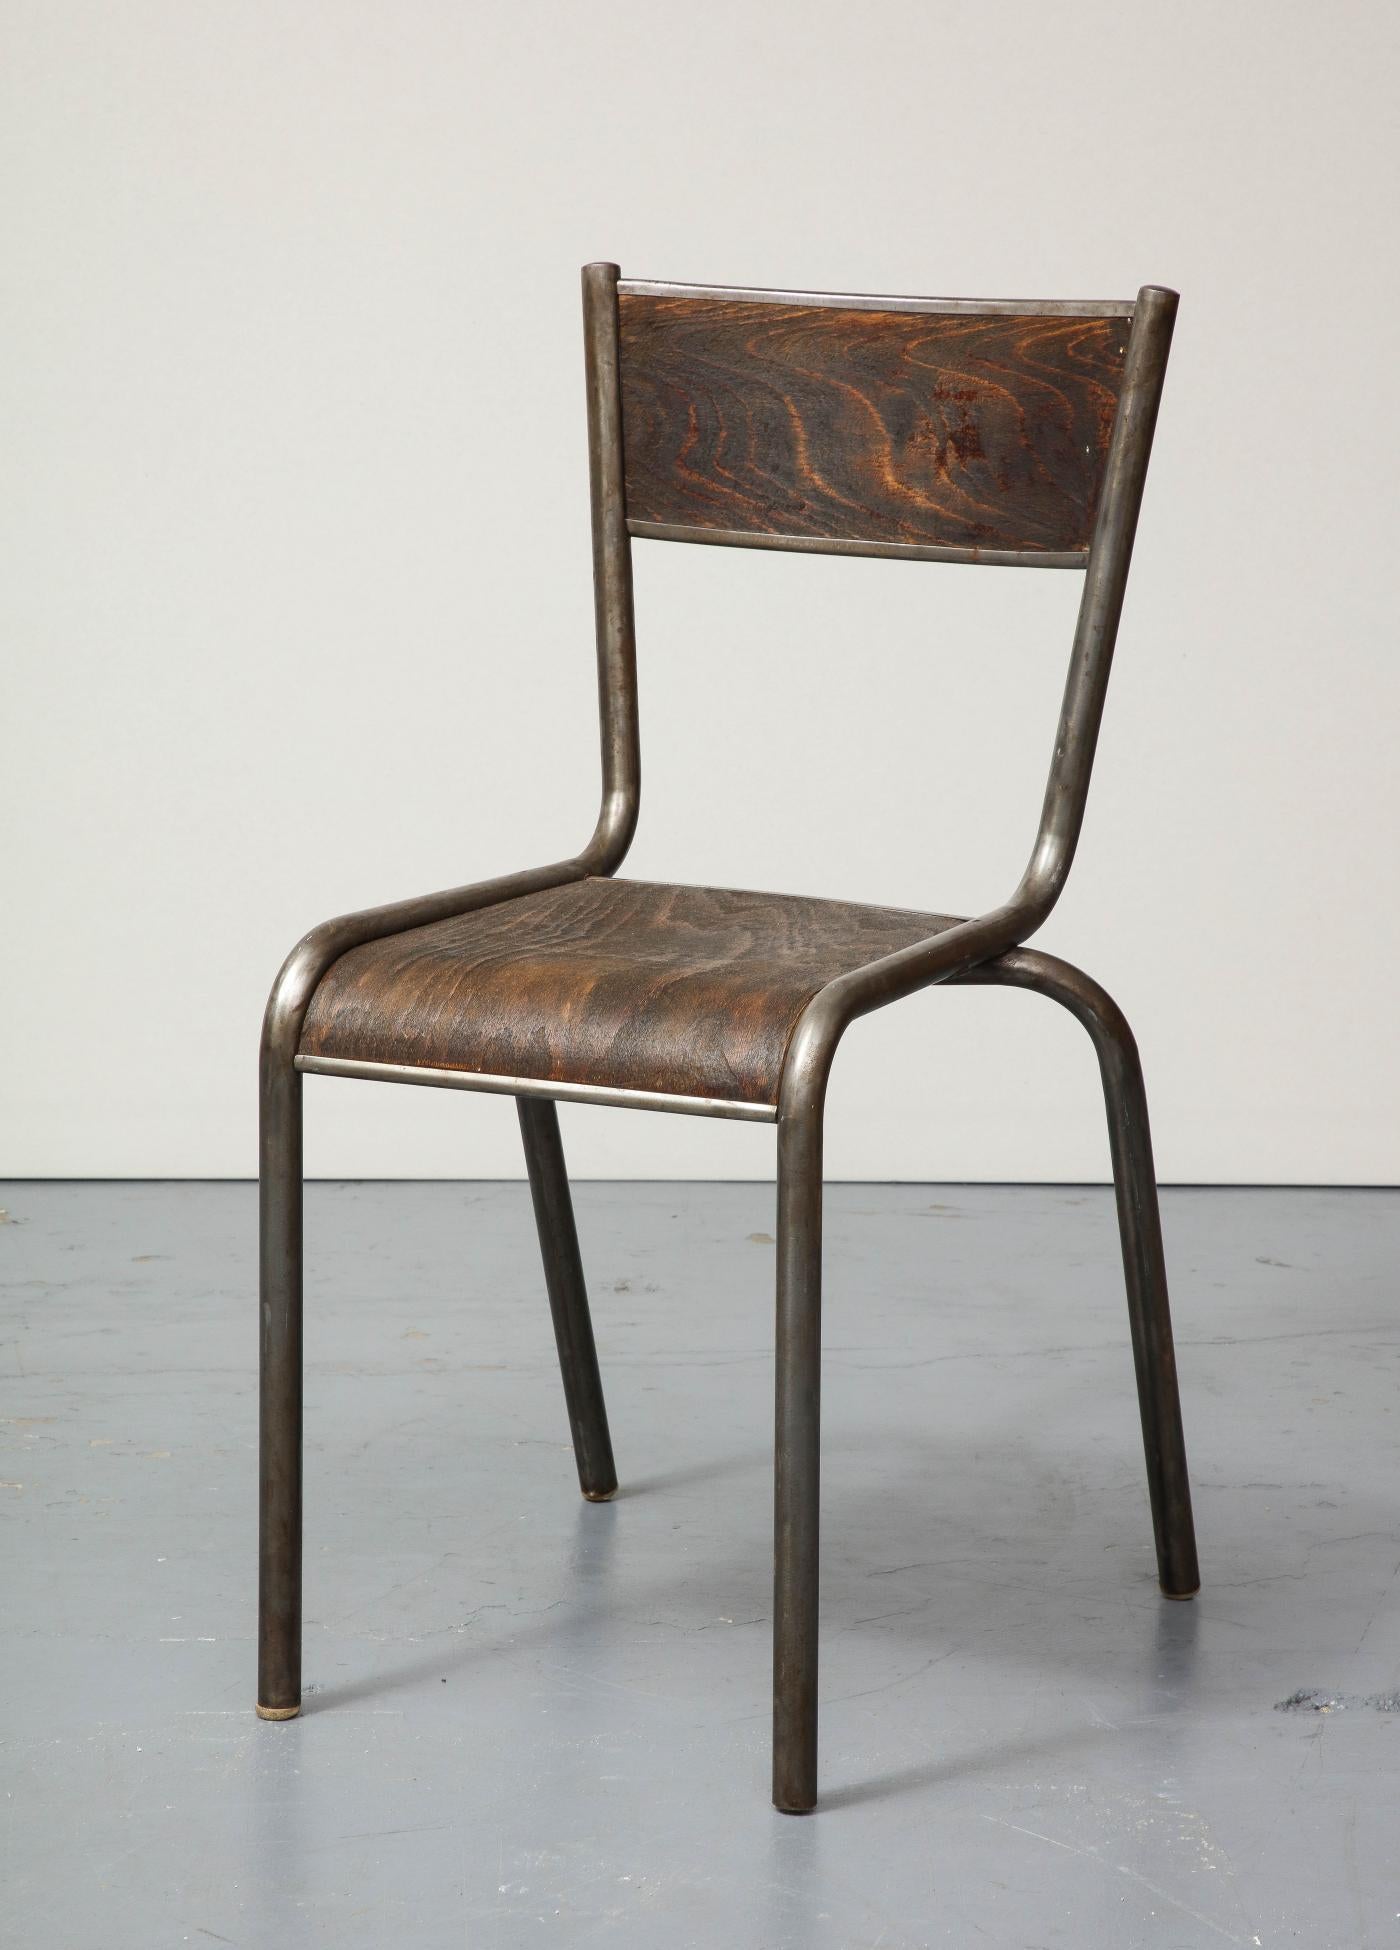 Polished Steel and Bentwood Chair, circa 1940 In Excellent Condition For Sale In New York City, NY